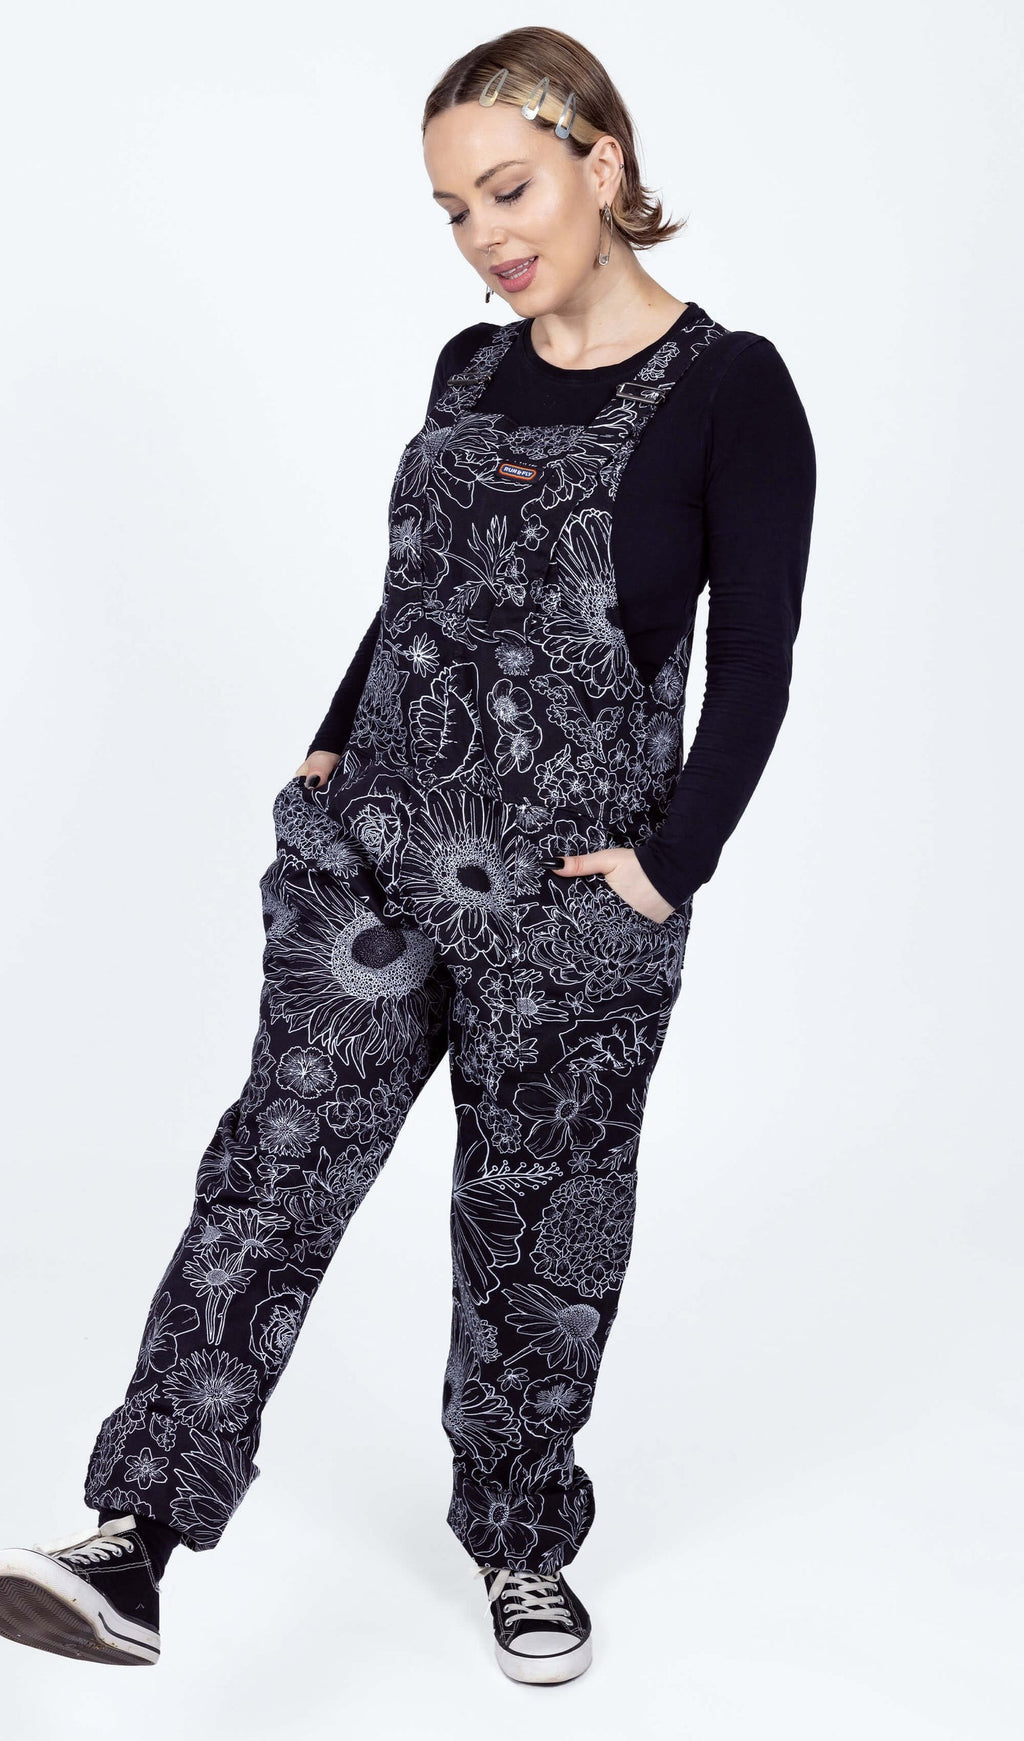 Black and White Floral Stretch Twill Cotton Dungarees by Run and Fly